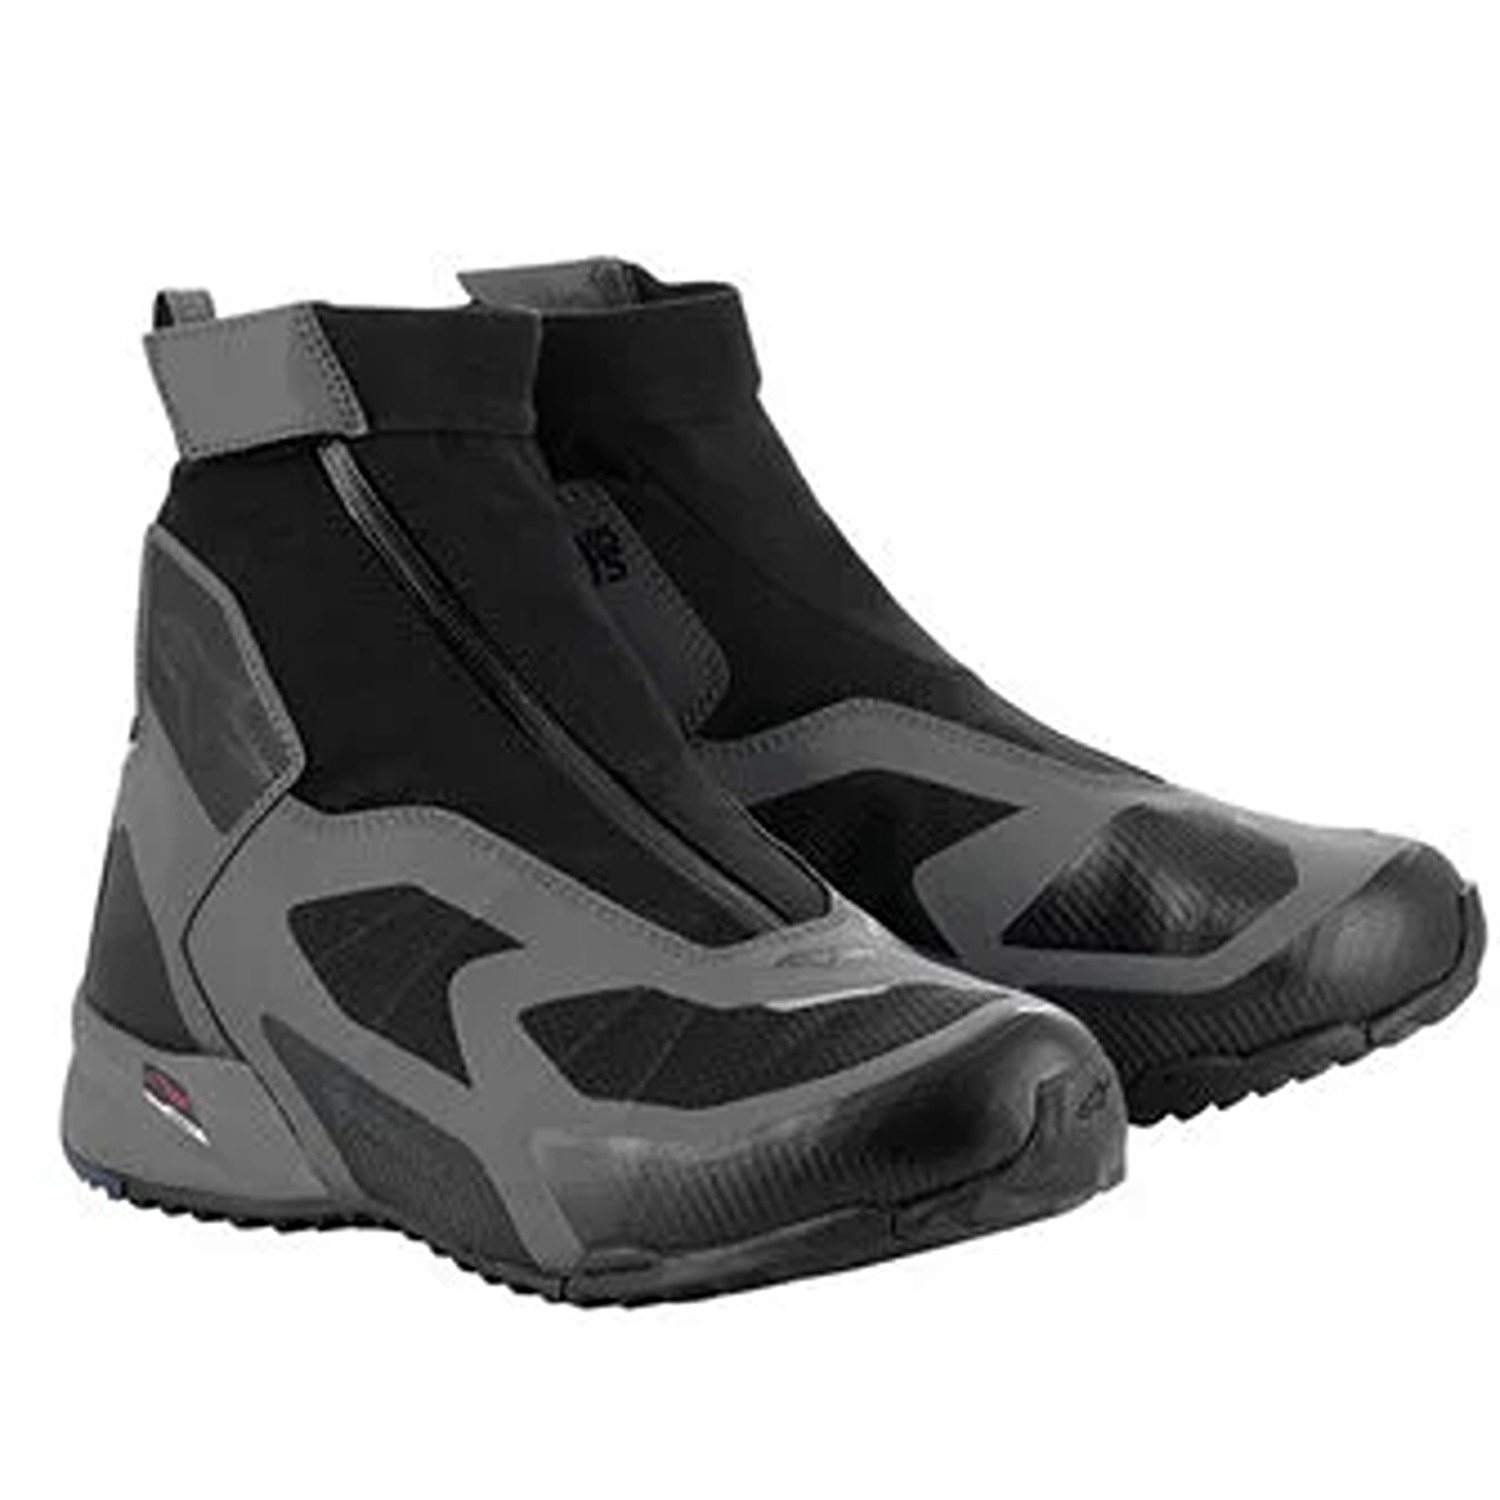 Image of Alpinestars CR-8 Gore-Tex Shoes Black Mid Gray Bright Red Size US 12 EN